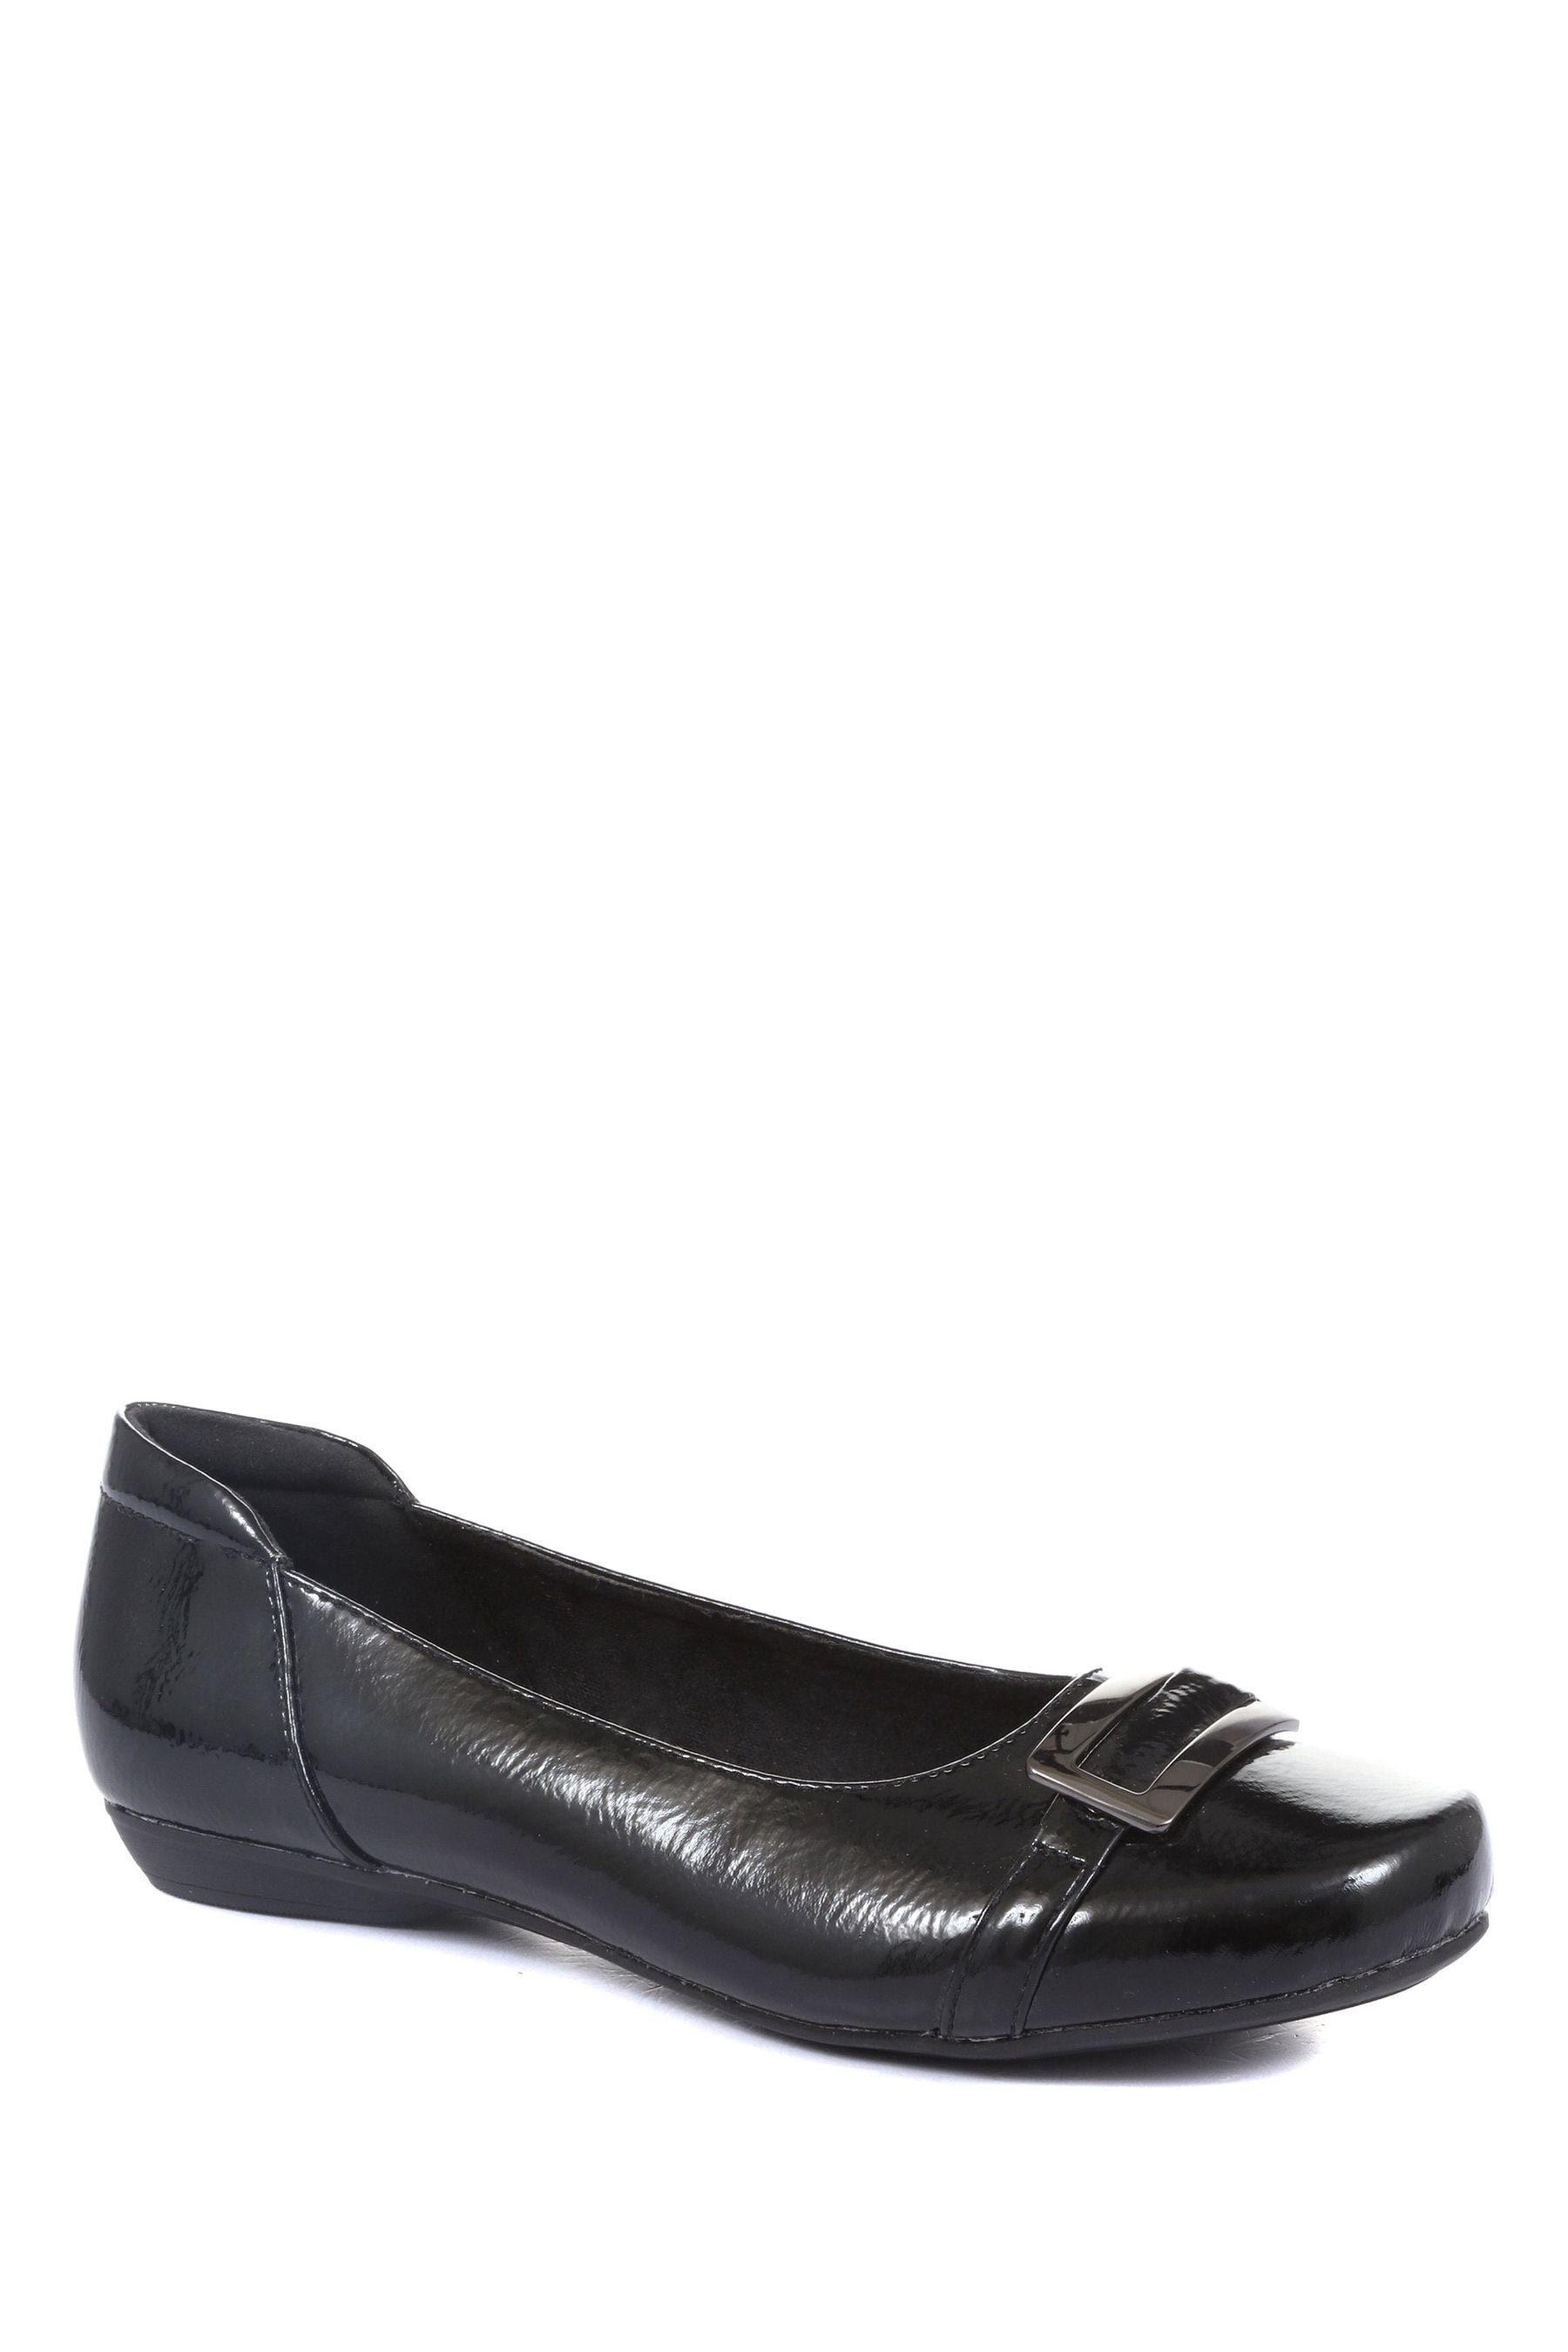 Buy Pavers Ladies Wide Fit Slip On Pumps from the Laura Ashley online shop